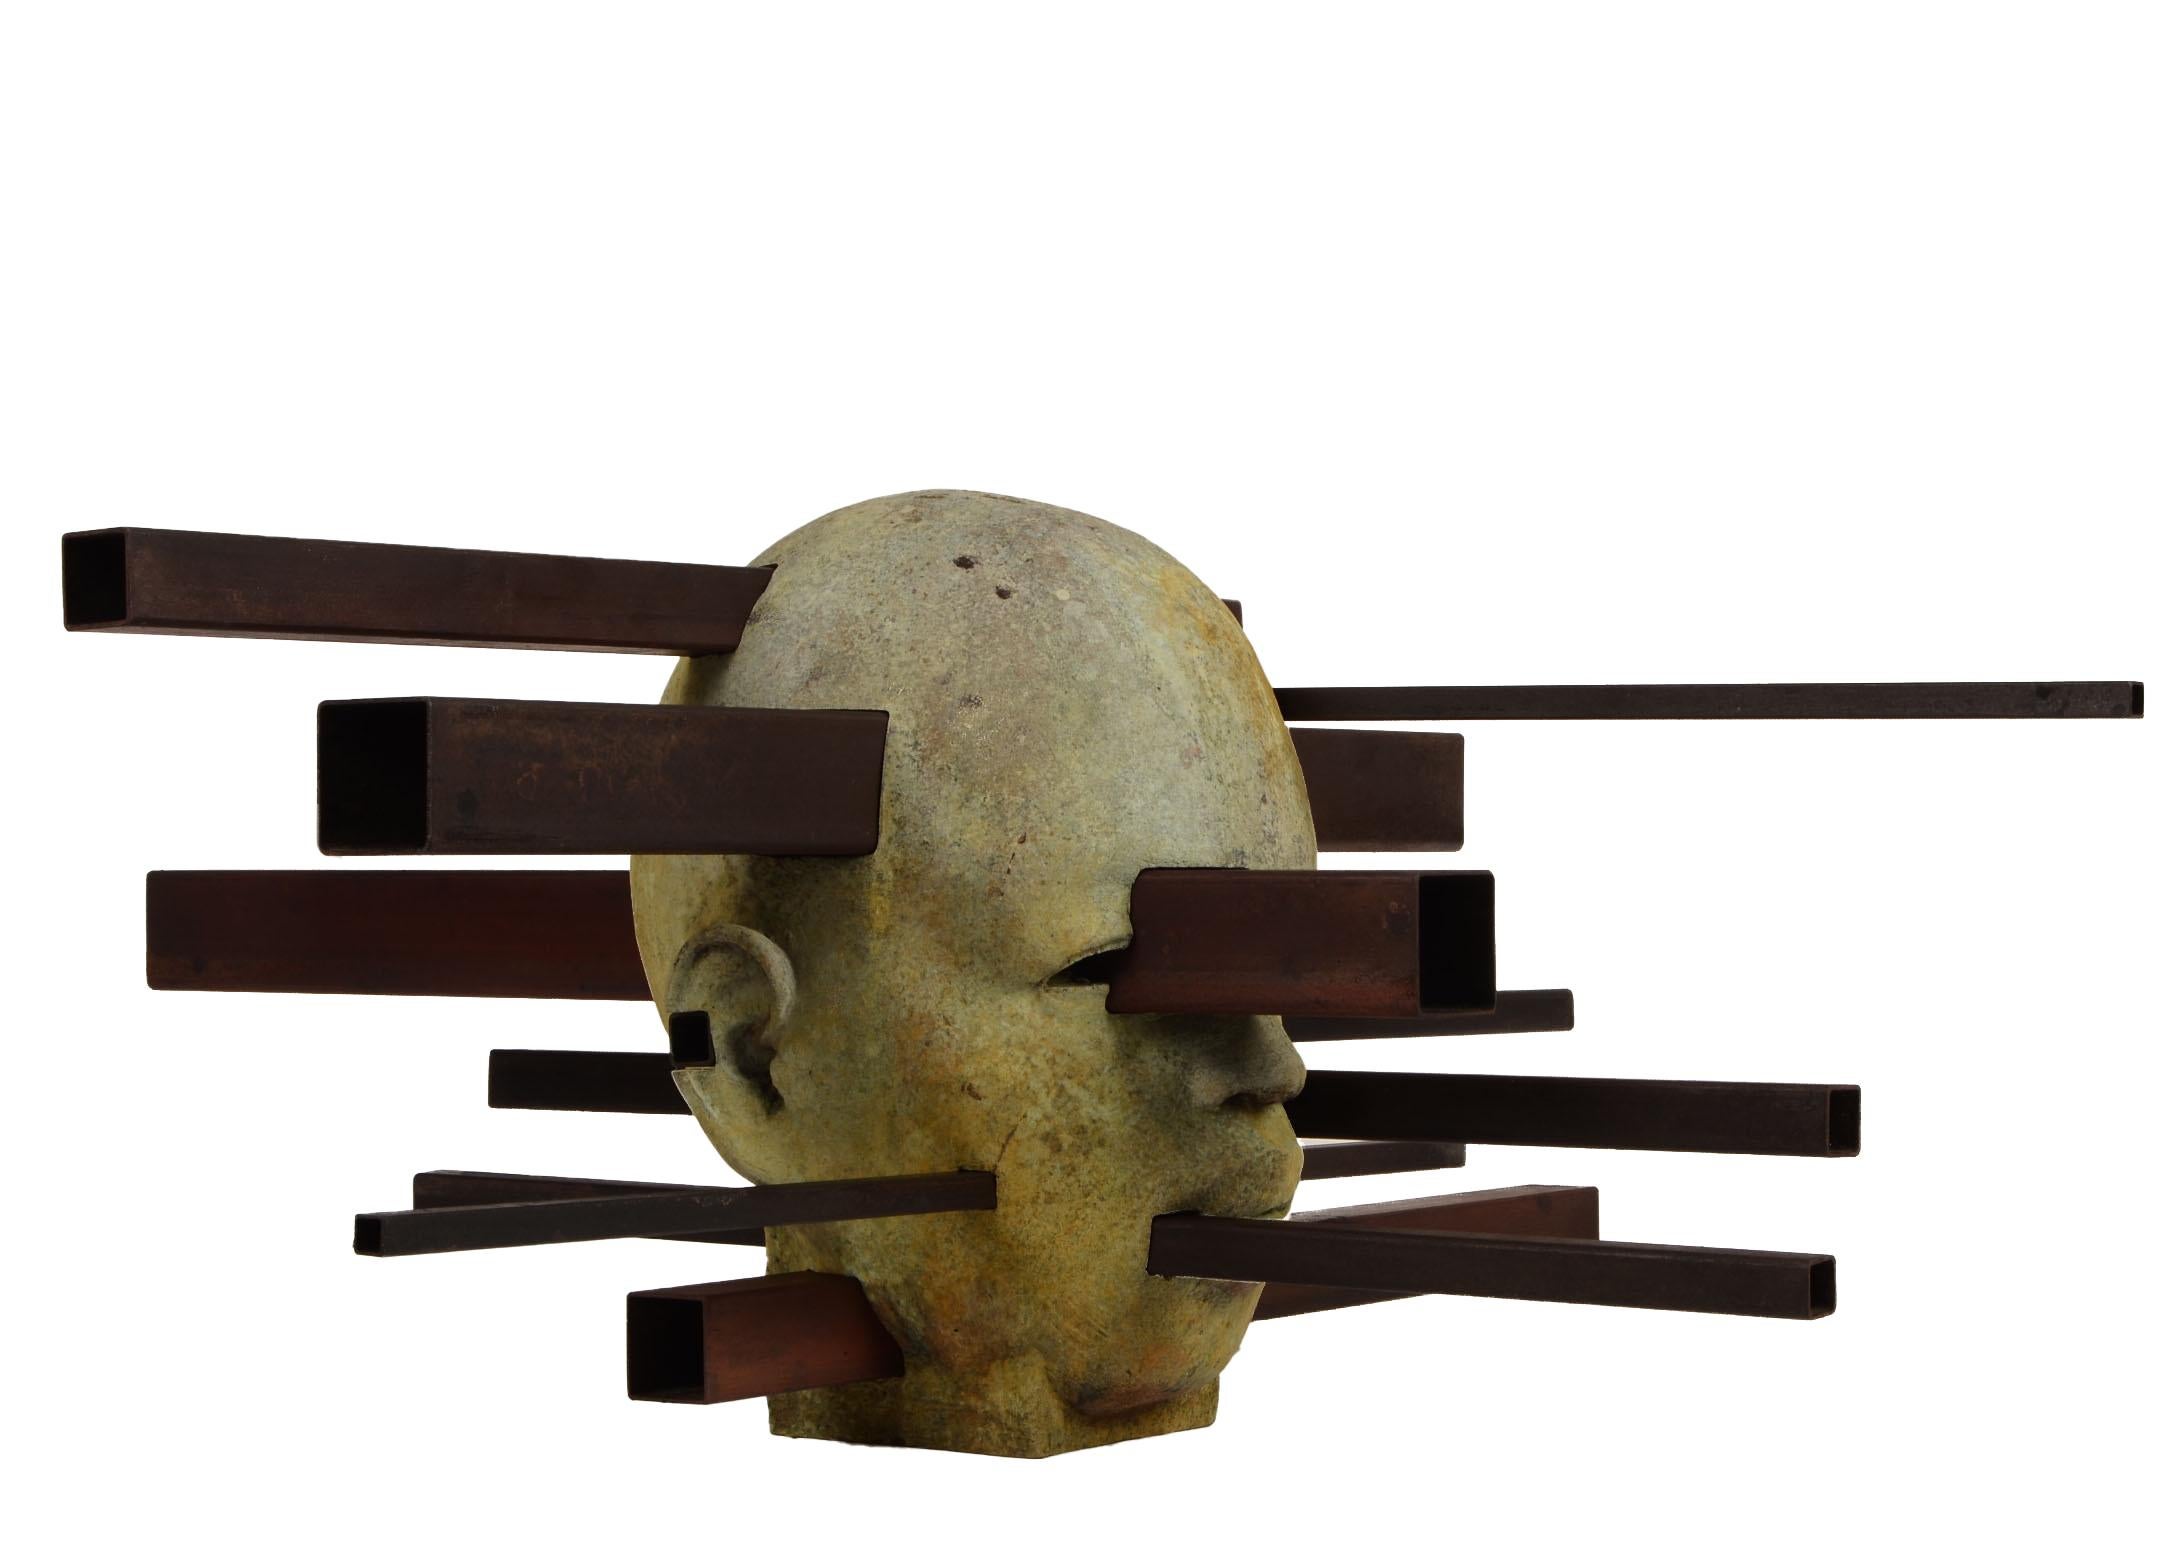 Interaction - Abstracted Bronze Bust, Rich Green Patina, Rusted Steel - Sculpture by Jesus Curia Perez